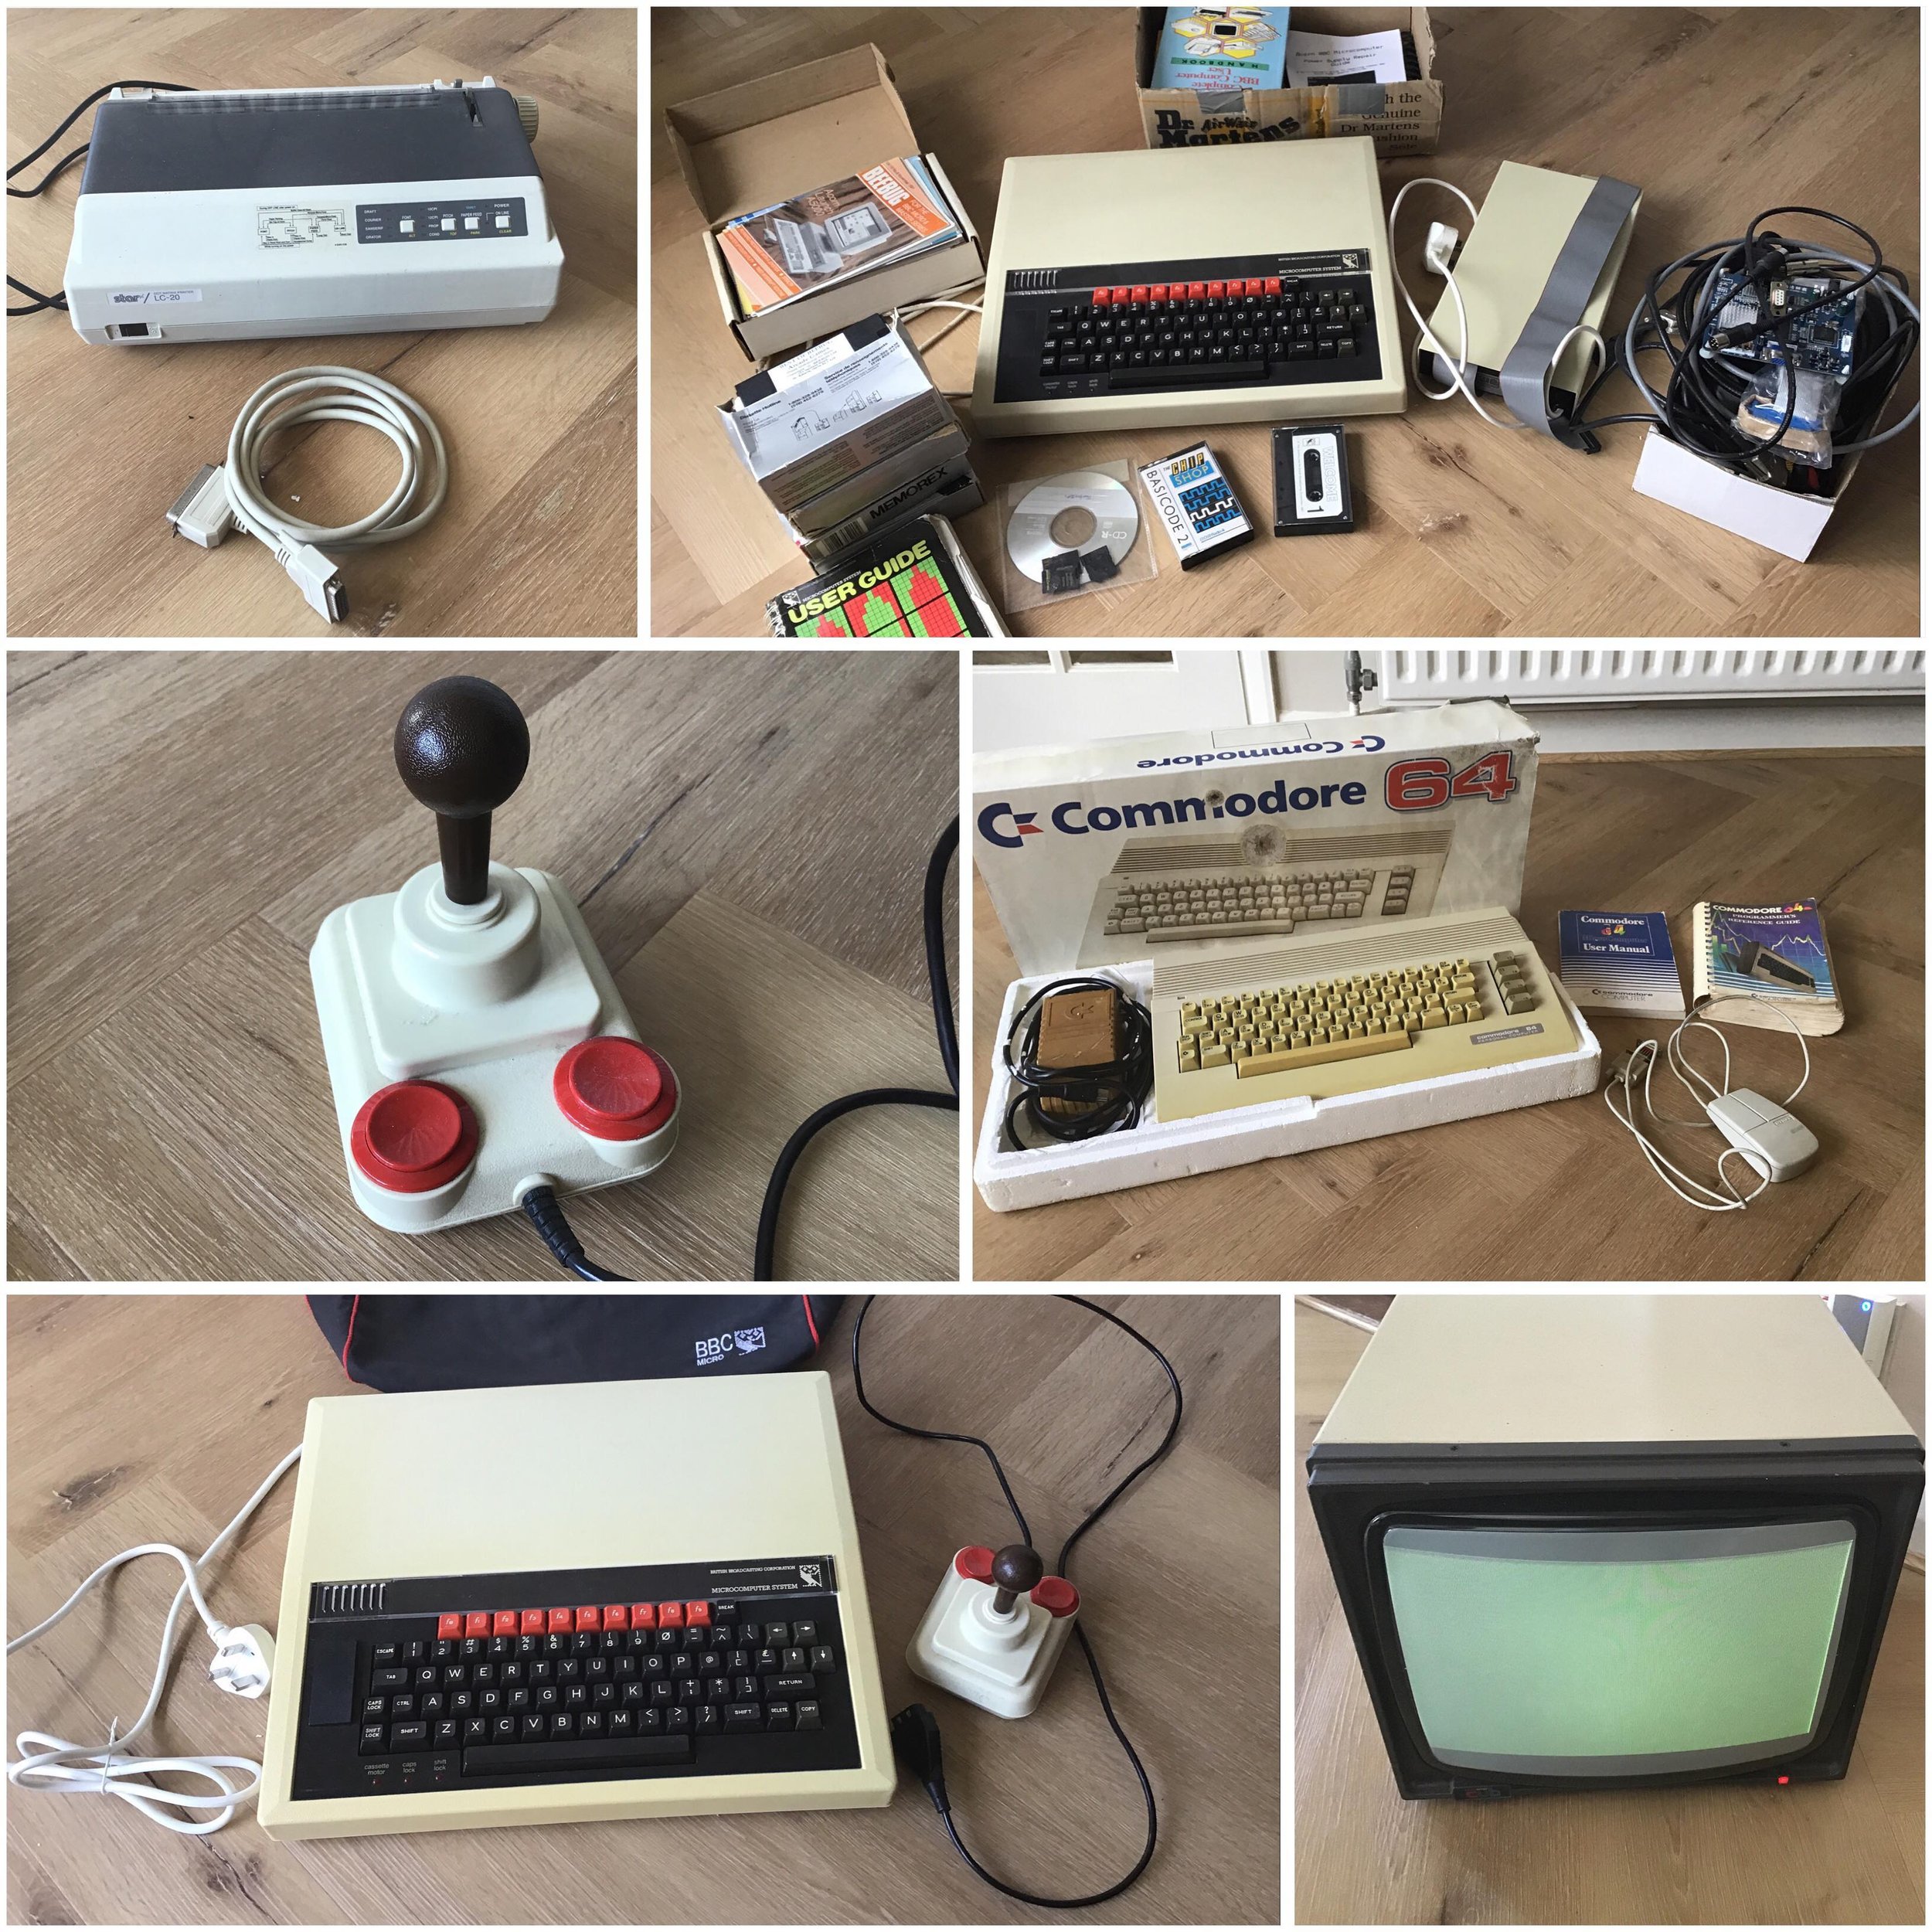 A blast from the past!

A collection of vintage electronics, including Acorn BBC microcomputers and a Commodore 64. Available from my shop, please message me for more info.

#vintagecomputer #vintagetechnology #vintage #vintageshop #commodore64 #bbcm